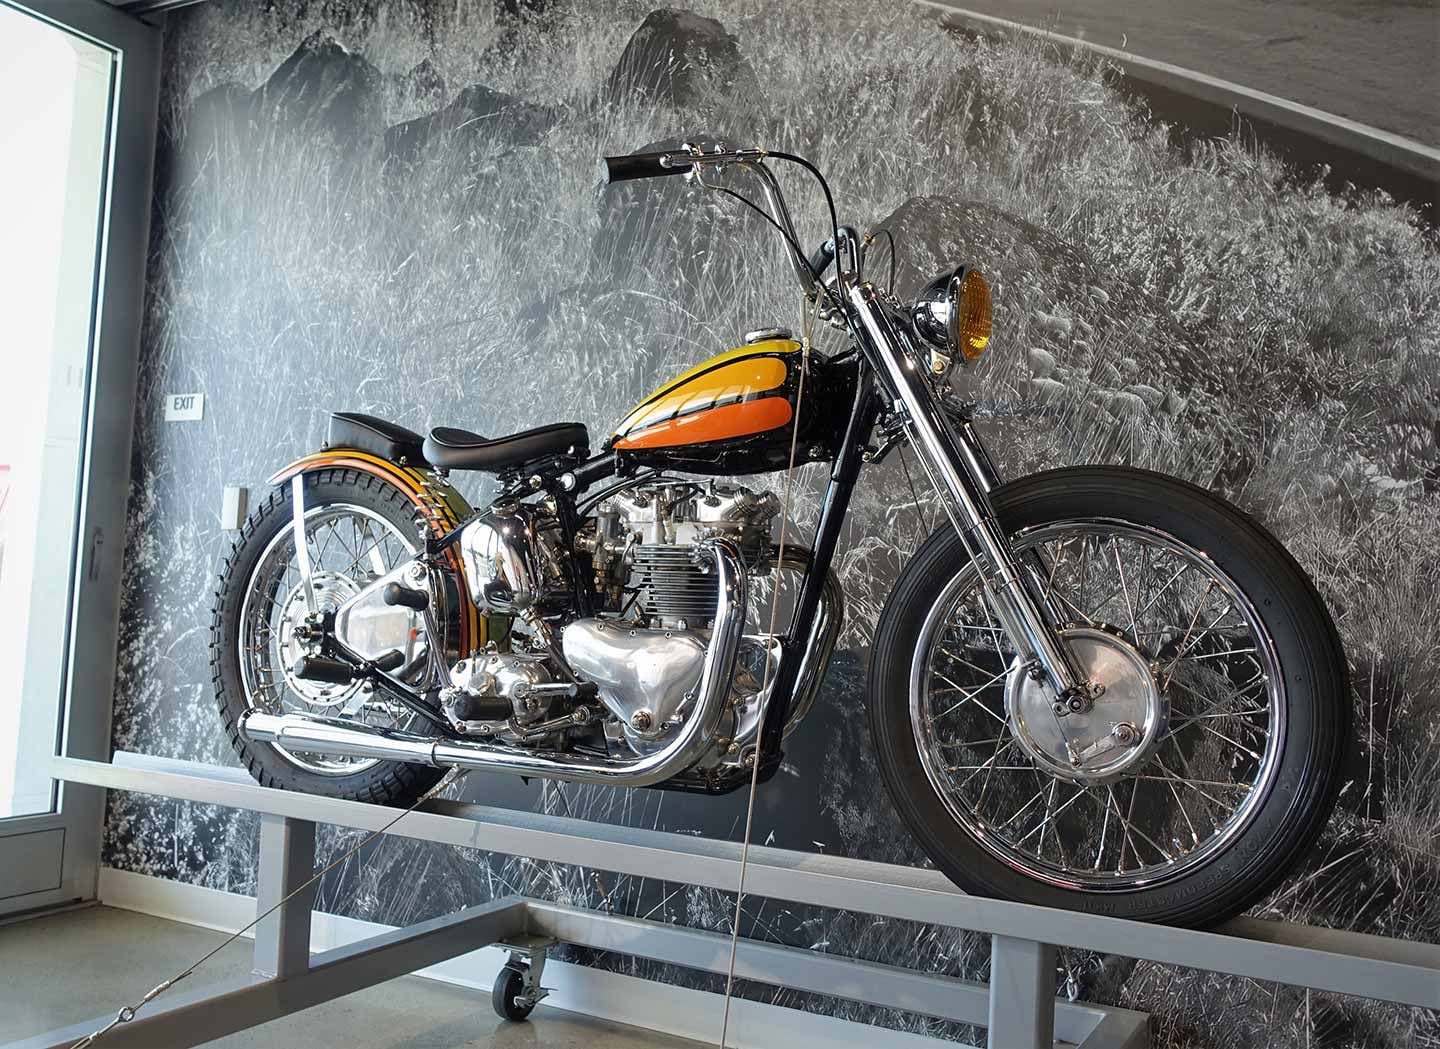 When art inspires real life, you get something like this 1952 Triumph Speed Twin custom, built by Jared Weems and based on renowned moto-artist David Mann’s “Dog Gone Hot Dogs” painting.